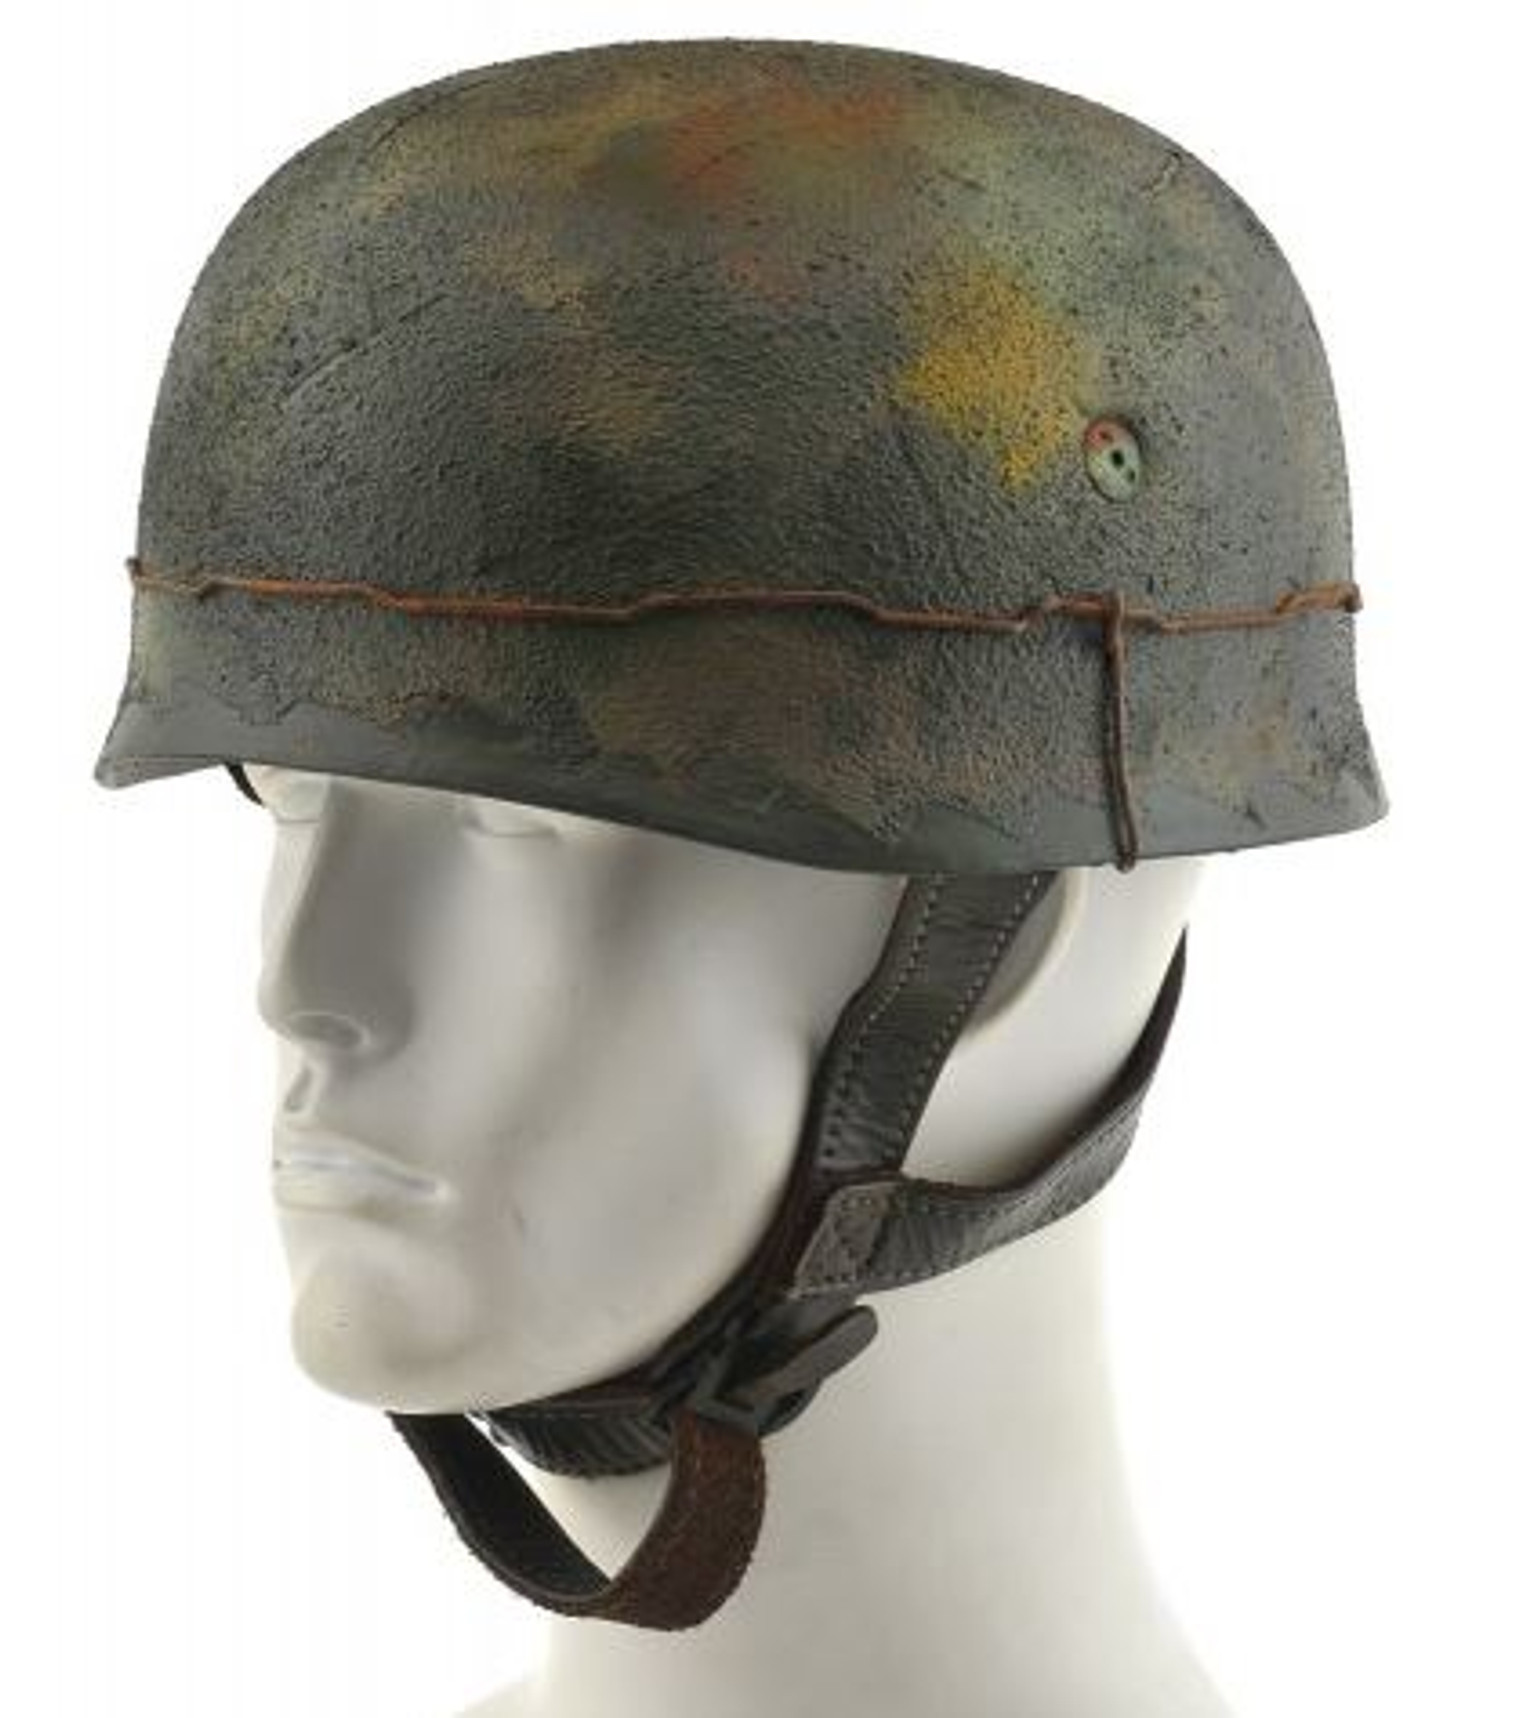 GERMAN WW2 PARATROOPER M38 FALLSCHIRMJAGER HELMET Multi color Camouflage with texture wire Normandy